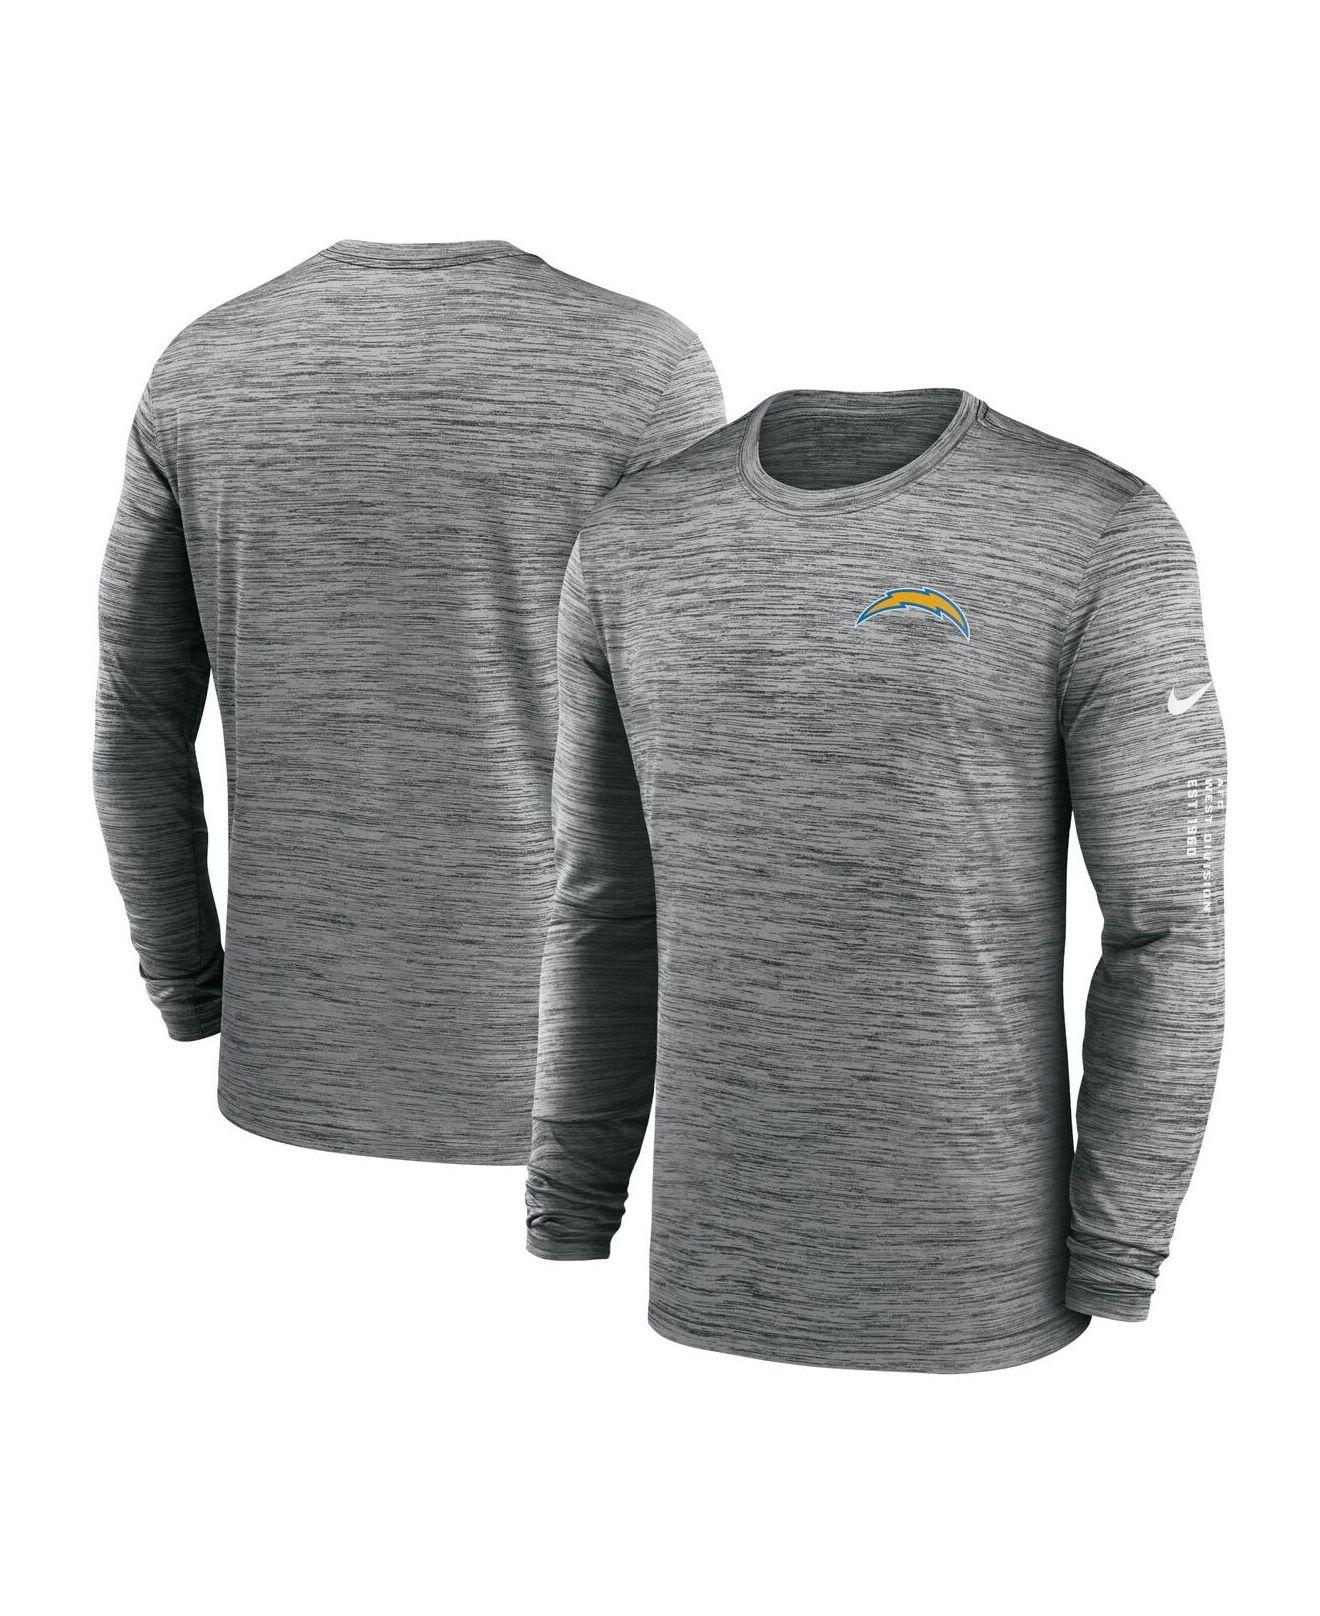 Nike Dri-FIT Sideline Velocity (NFL Los Angeles Chargers) Men's